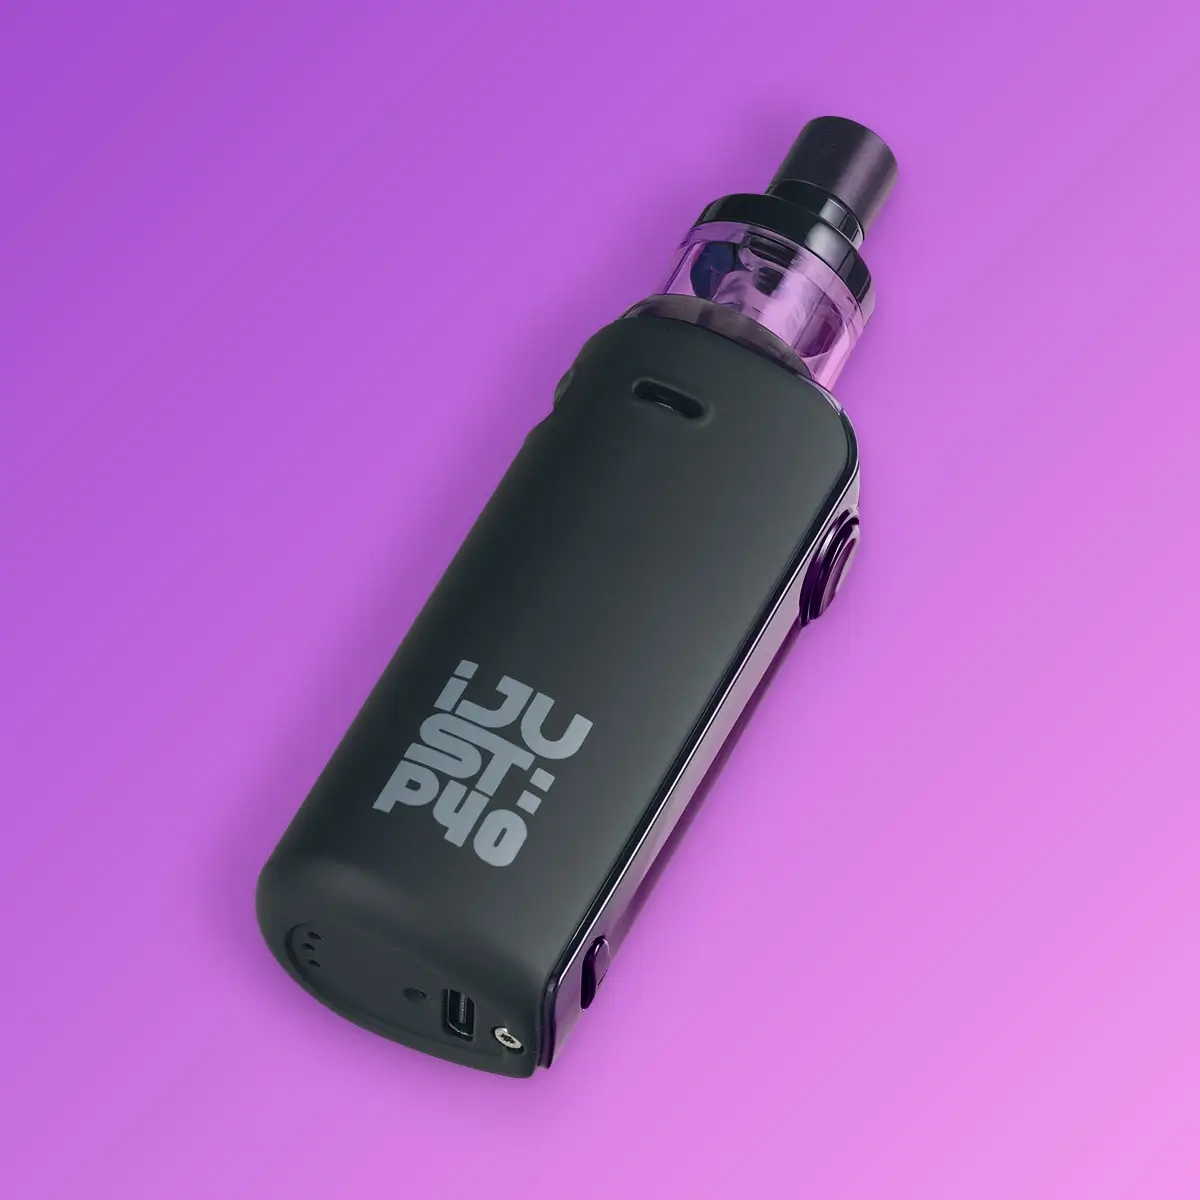 Eleaf's iJust P40 sub ohm kit in front of a purple and pink background